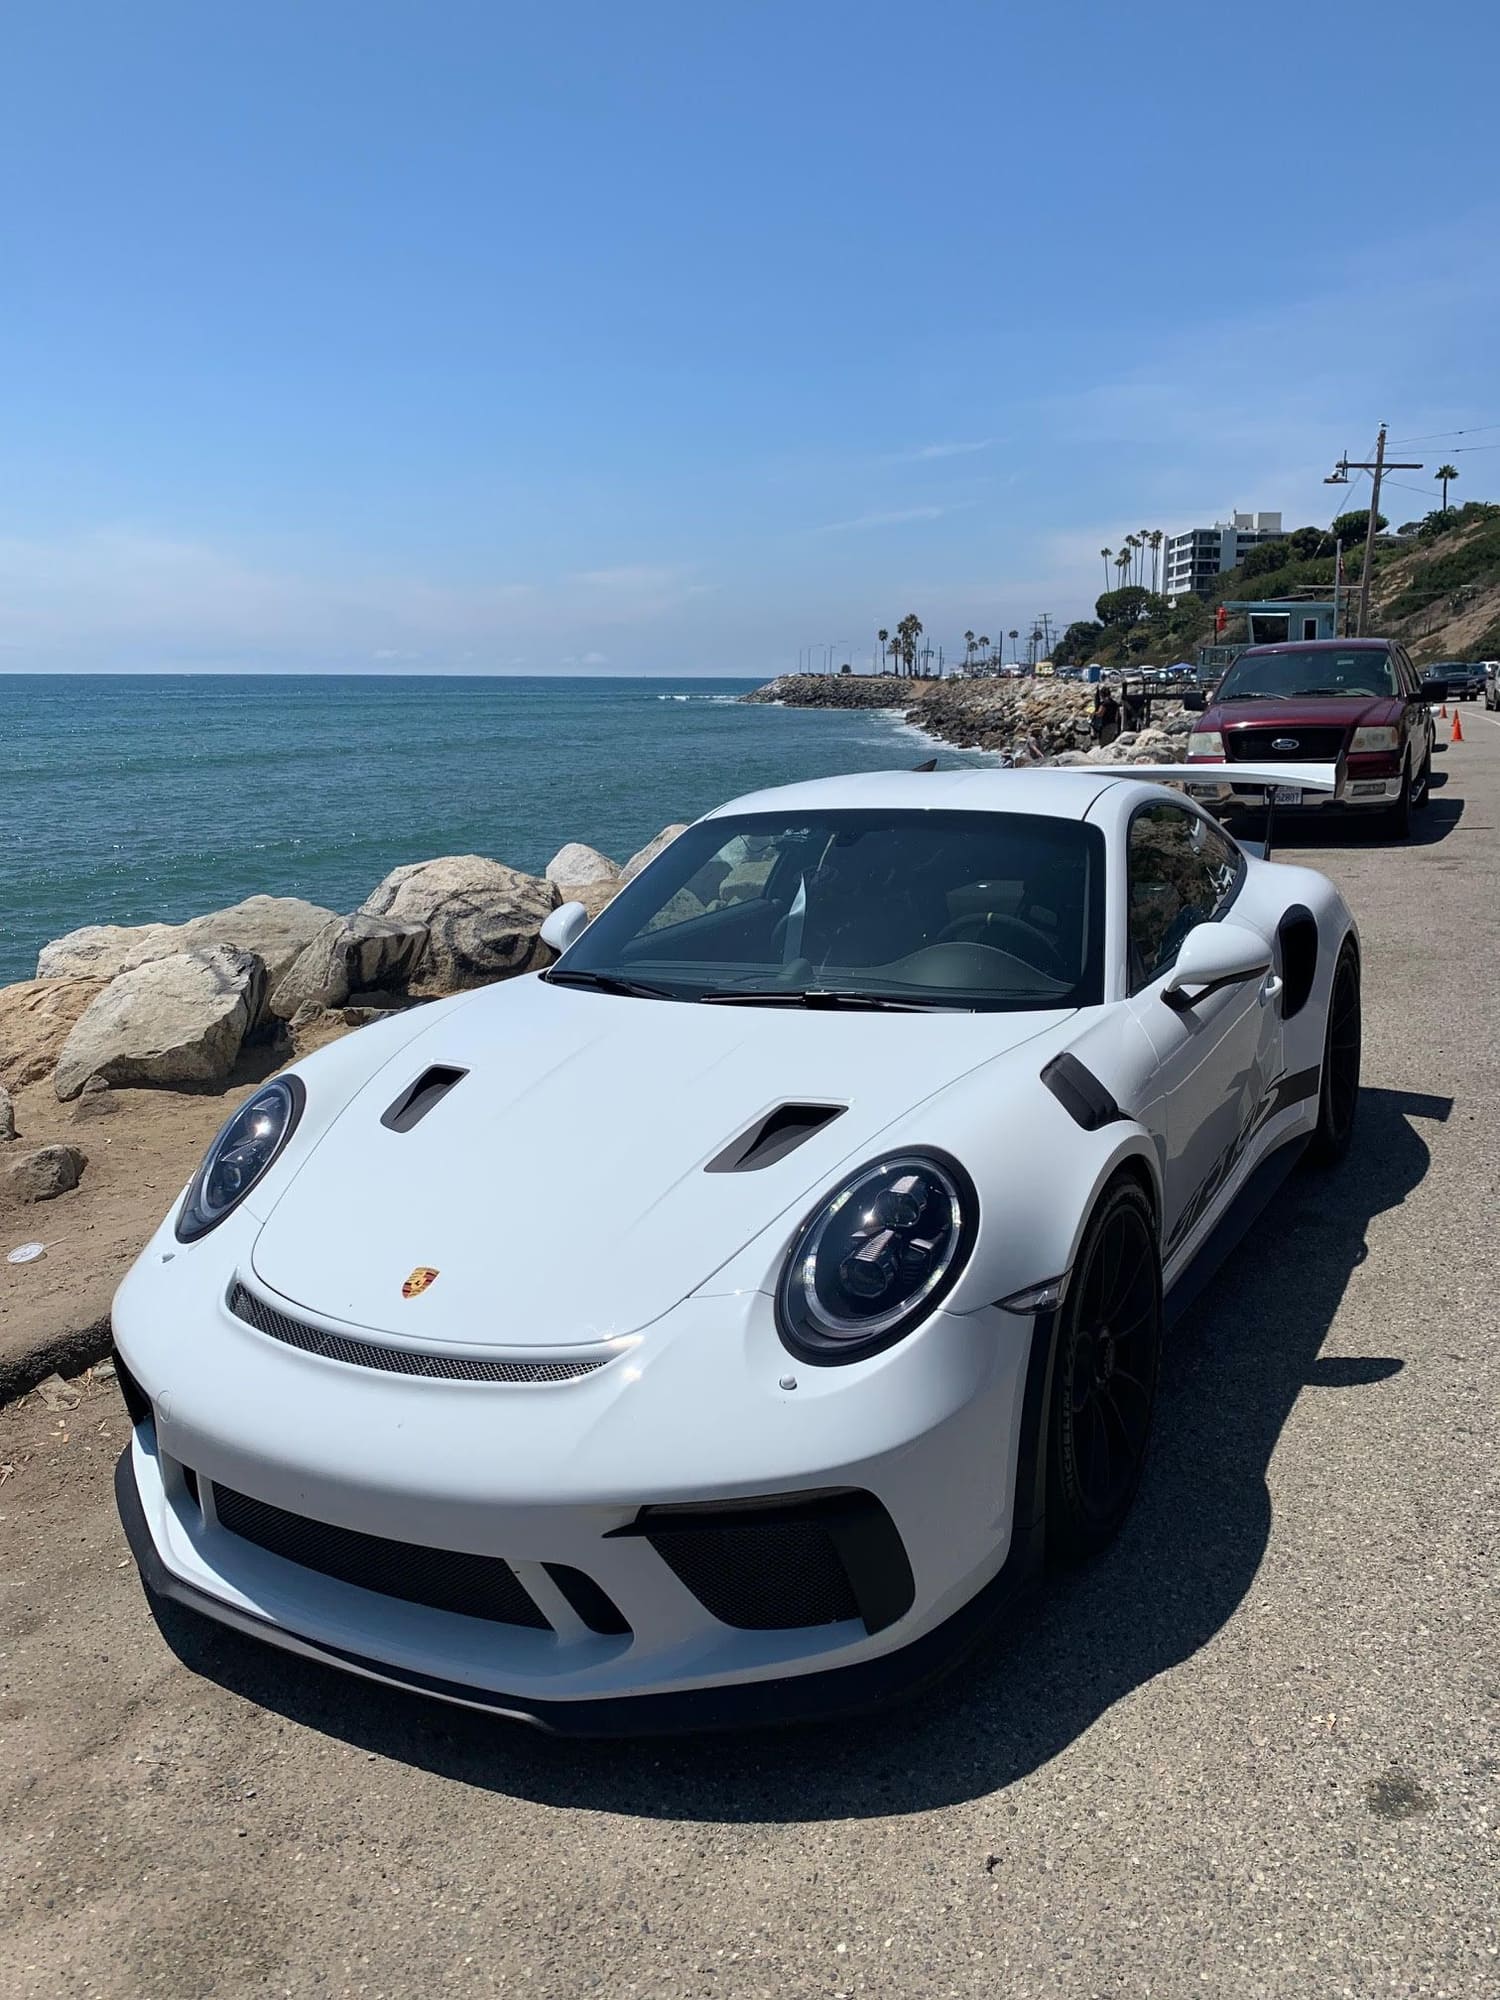 2019 Porsche GT3 - FS: 2019 White GT3 RS in Los Angeles Great Condition Additional Warranty from Porsche - Used - VIN WP0AF2A98KS164065 - 3,800 Miles - 6 cyl - 2WD - Automatic - Coupe - White - Los Angeles, CA 90094, United States